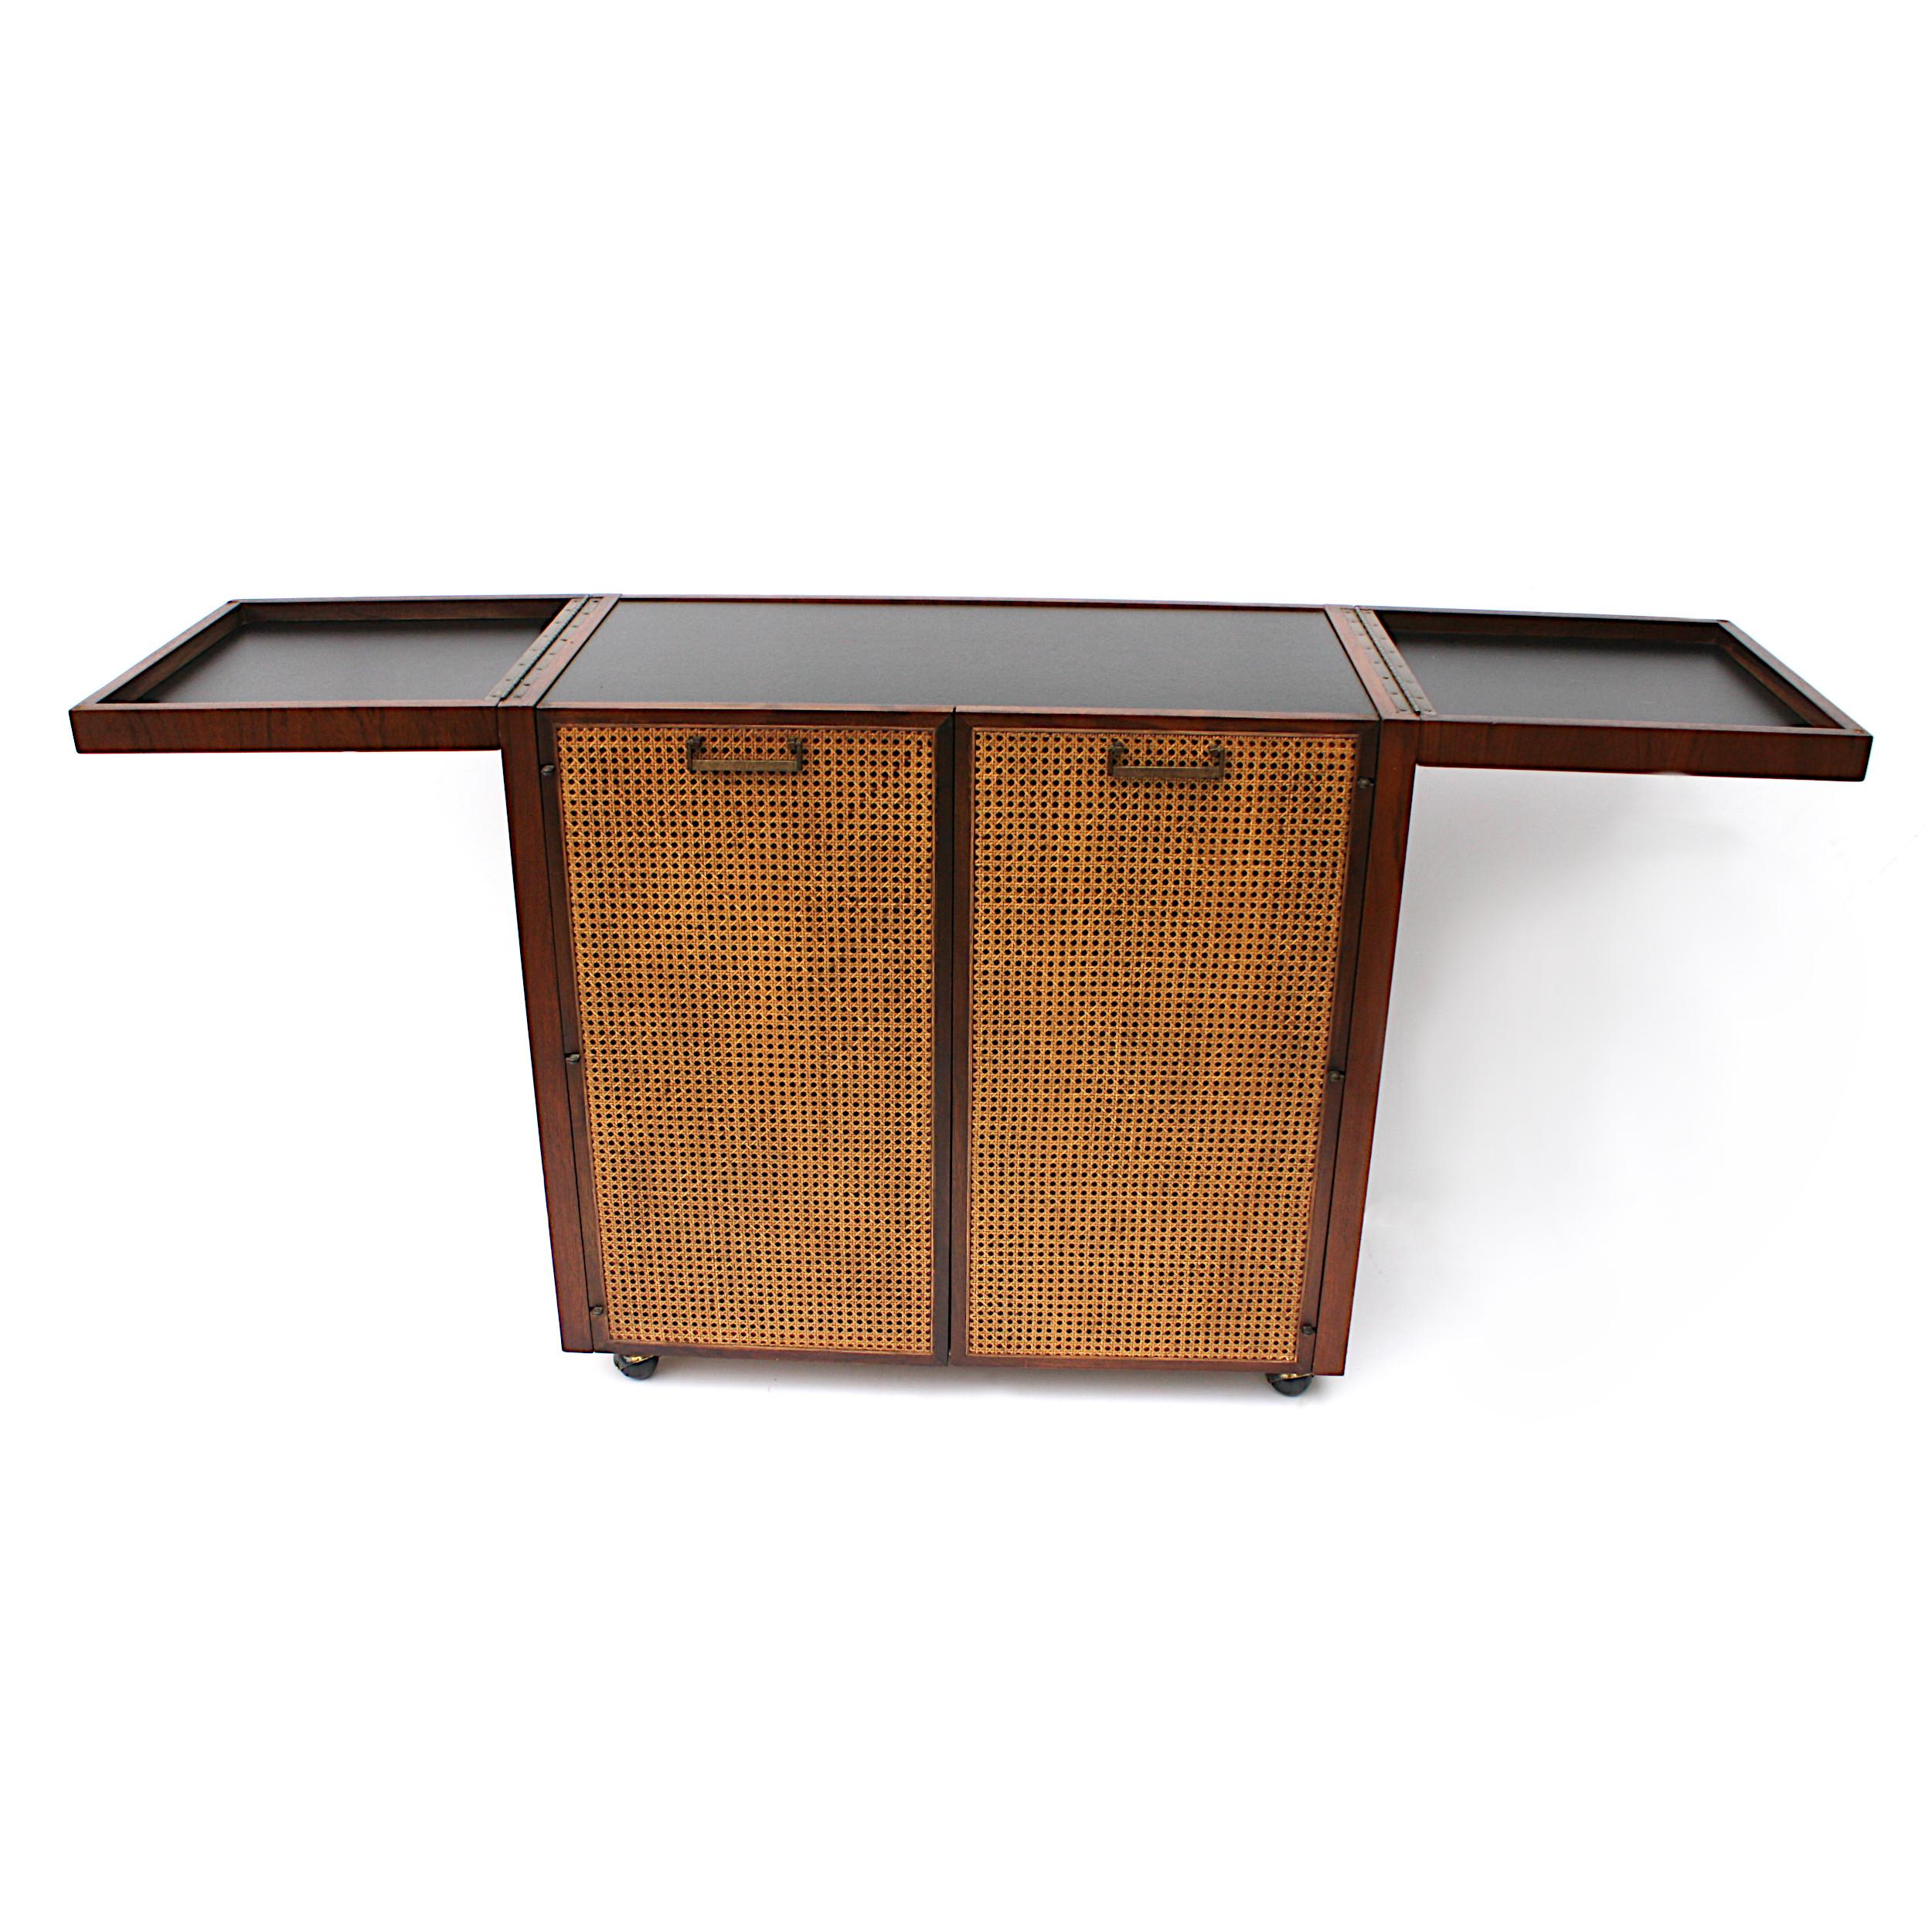 Cast Mid-Century Modern Rosewood Bar Serving Cart by Jack Cartwright for Founders